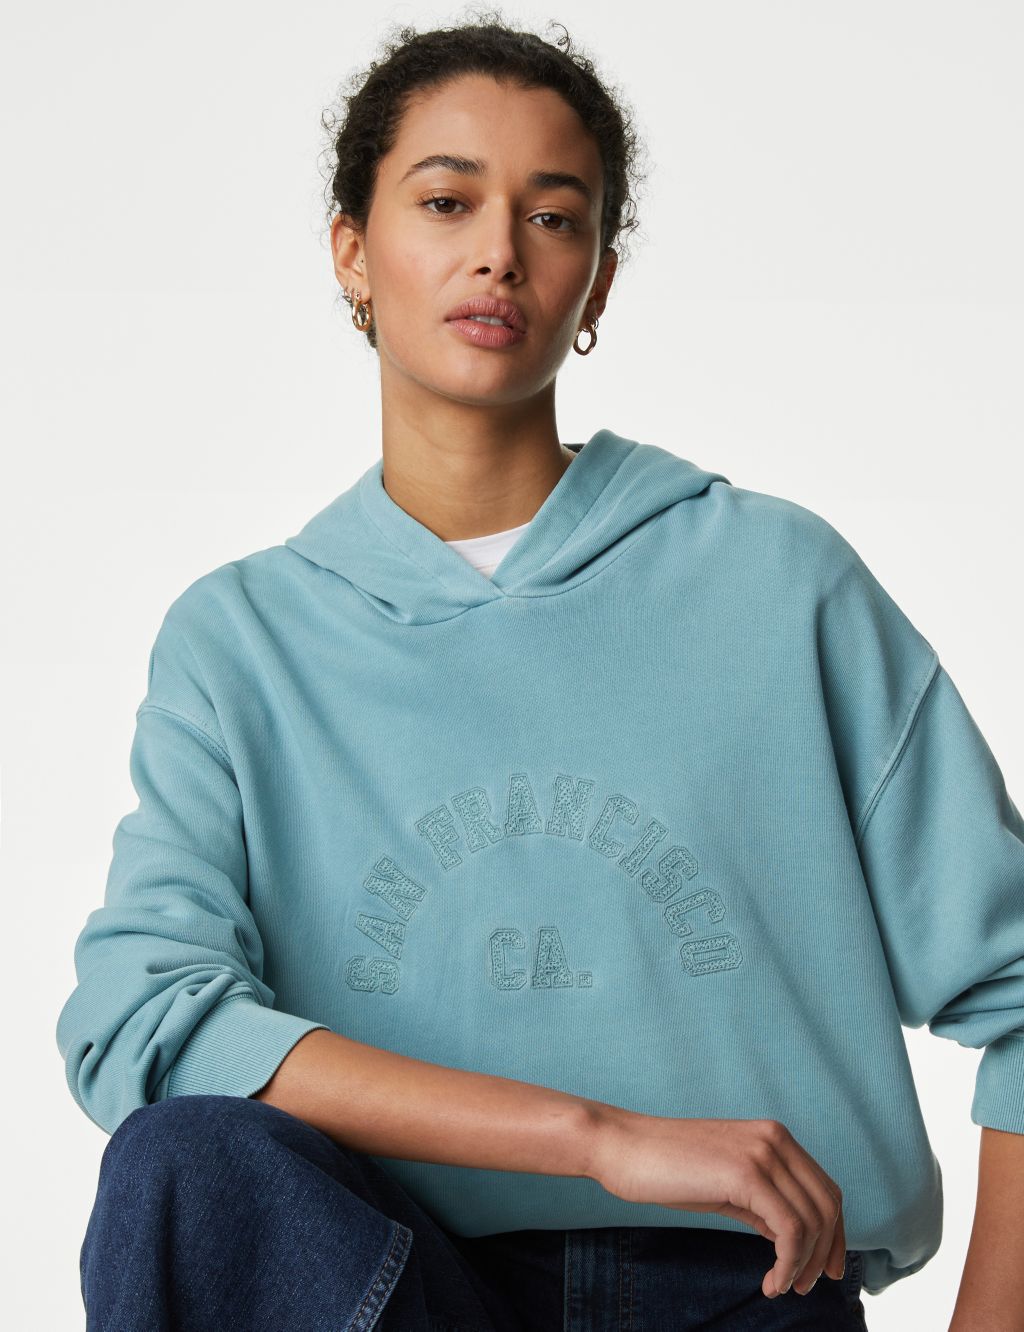 Pure Cotton Embroidered Hoodie | M&S Collection | M&S